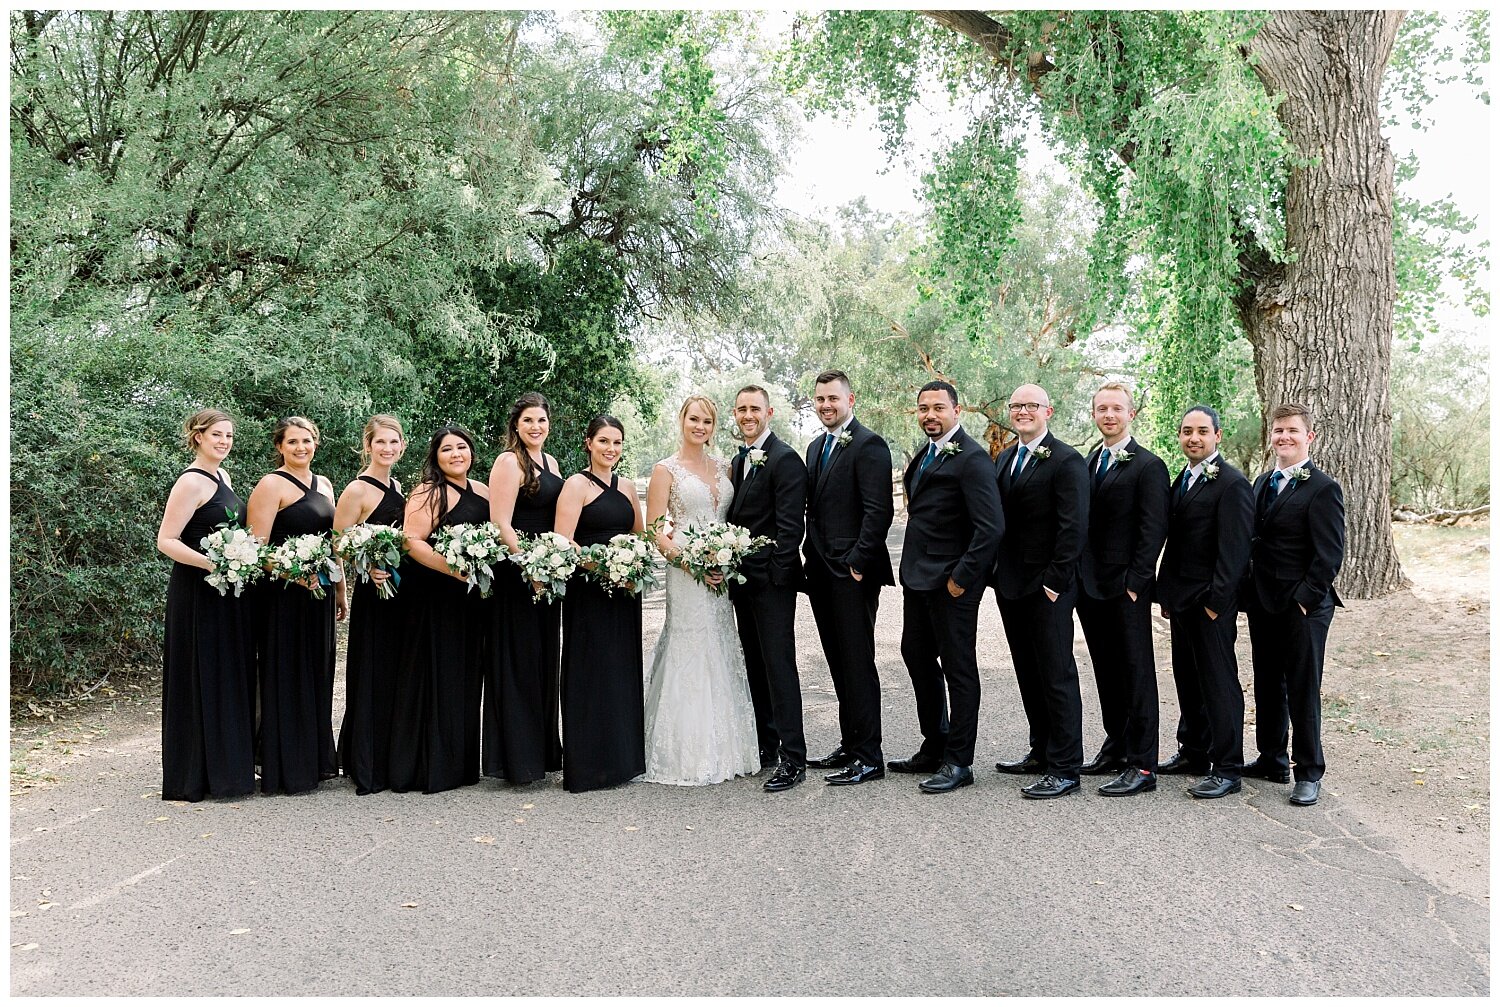 La Mariposa Resort Wedding Bridal Party wearing black suits and black dresses for a classic and timeless look.